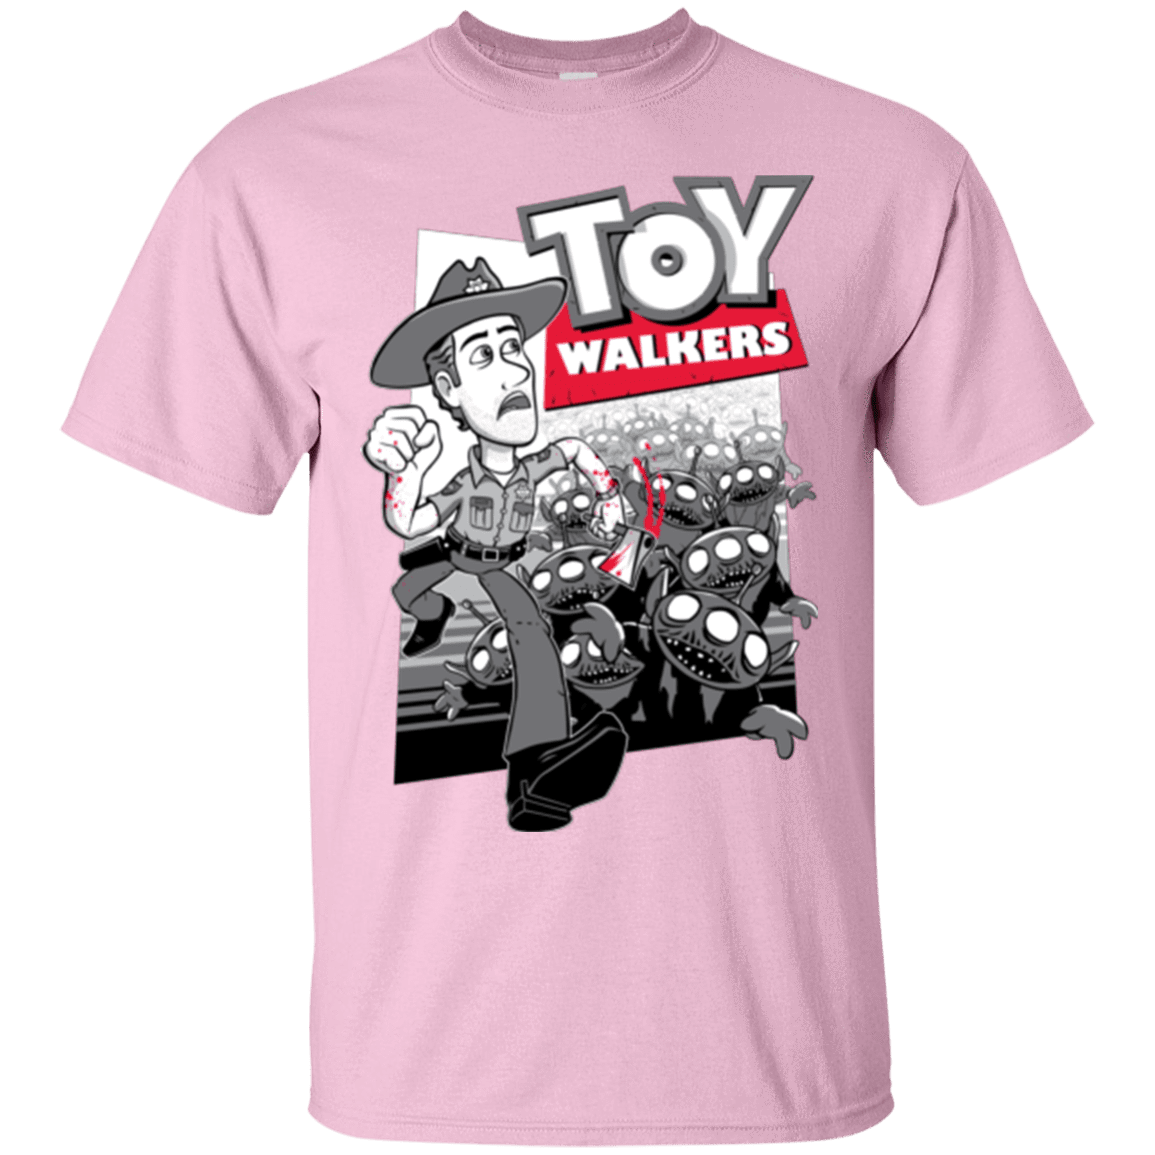 T-Shirts Light Pink / Small Toy Walkers T-Shirt